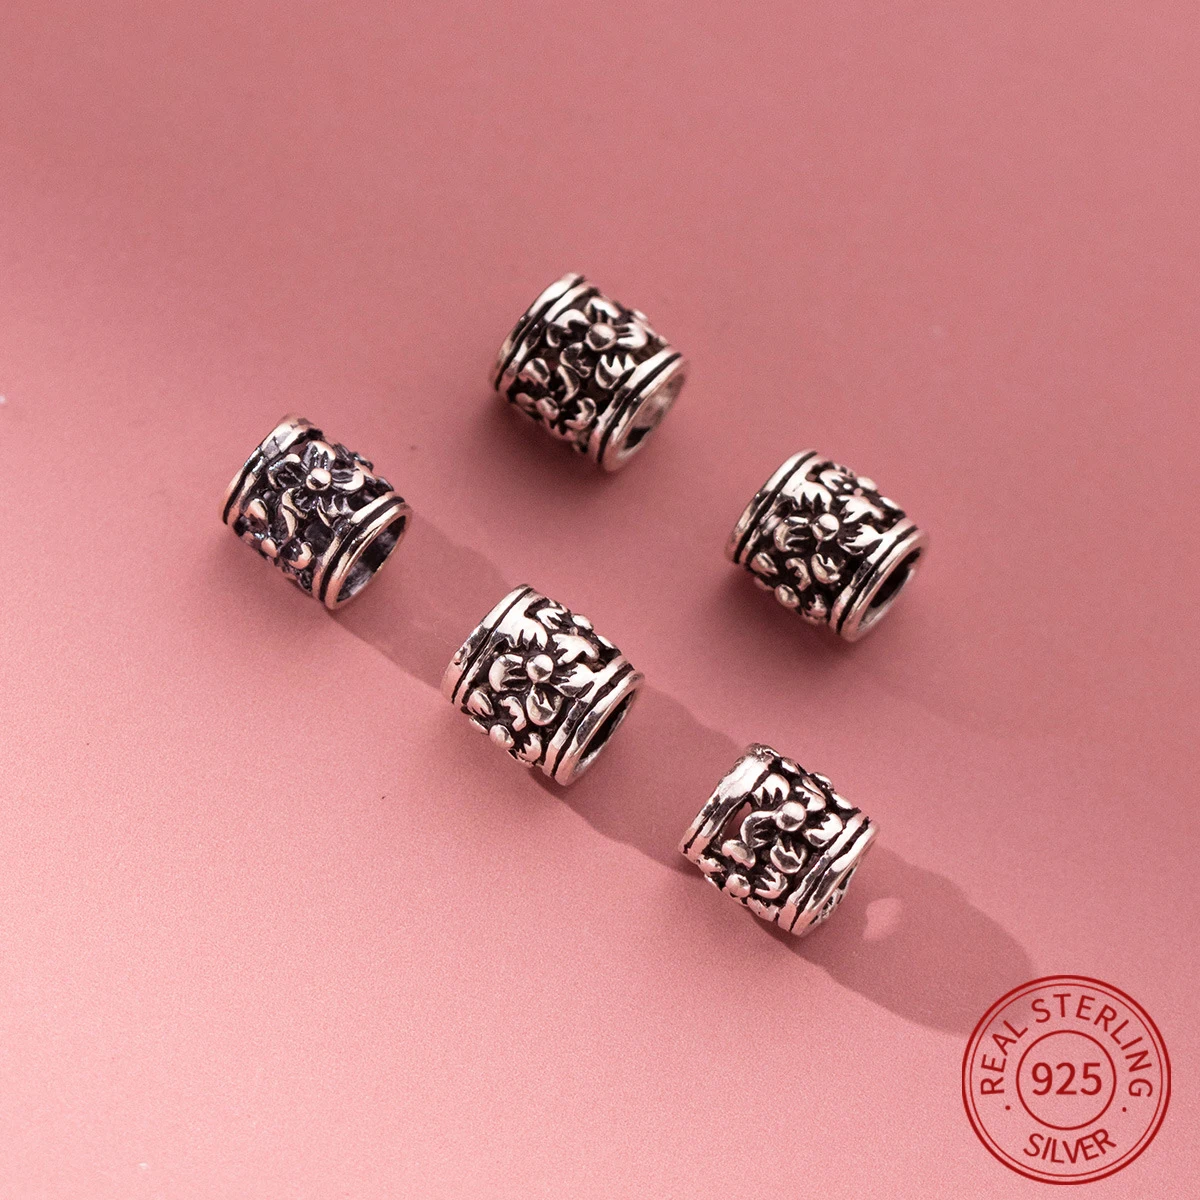 

S925 Silver Retro Marcasite Hollow Pattern Short Tube Spacer Beads for DIY Bracelet for Jewelry Making Supplies Findings